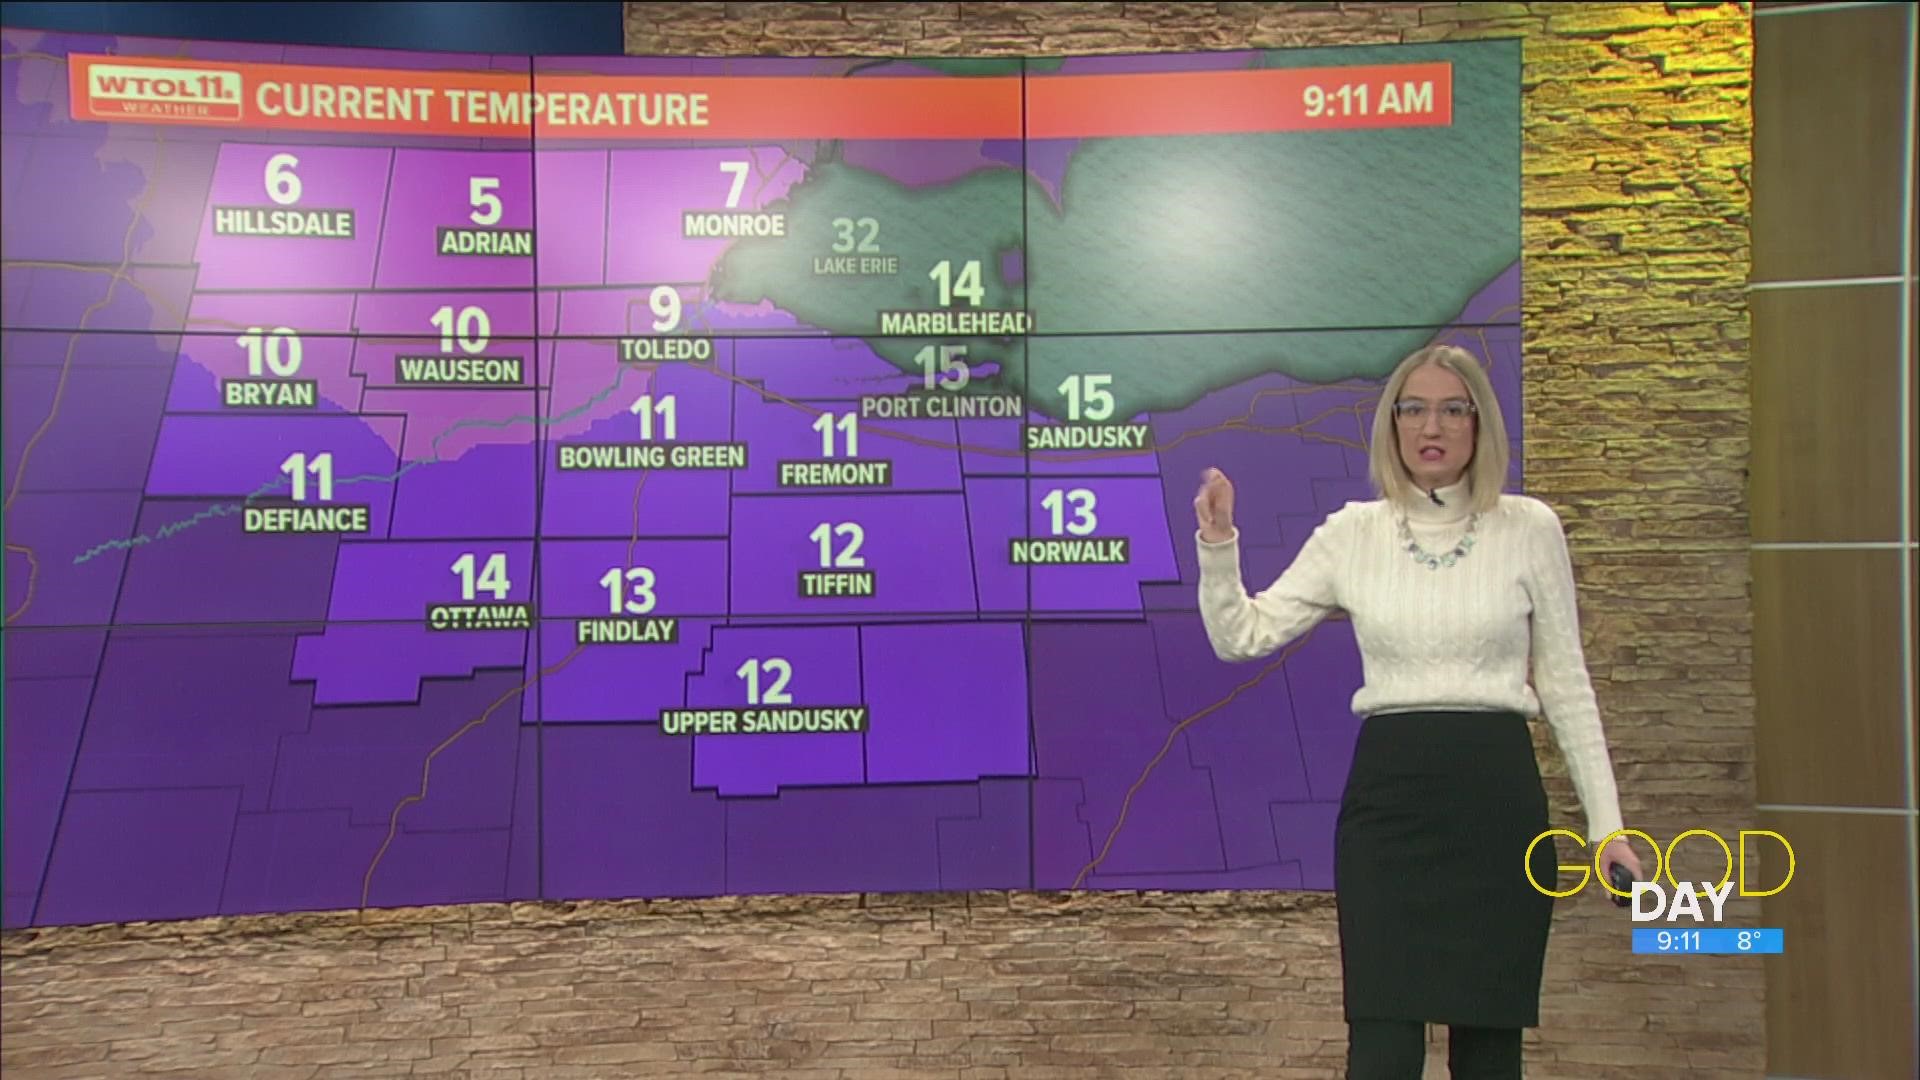 Single digit temps are widespread across northwest Ohio and southeast Michigan for a sunny, but bitterly cold Tuesday.